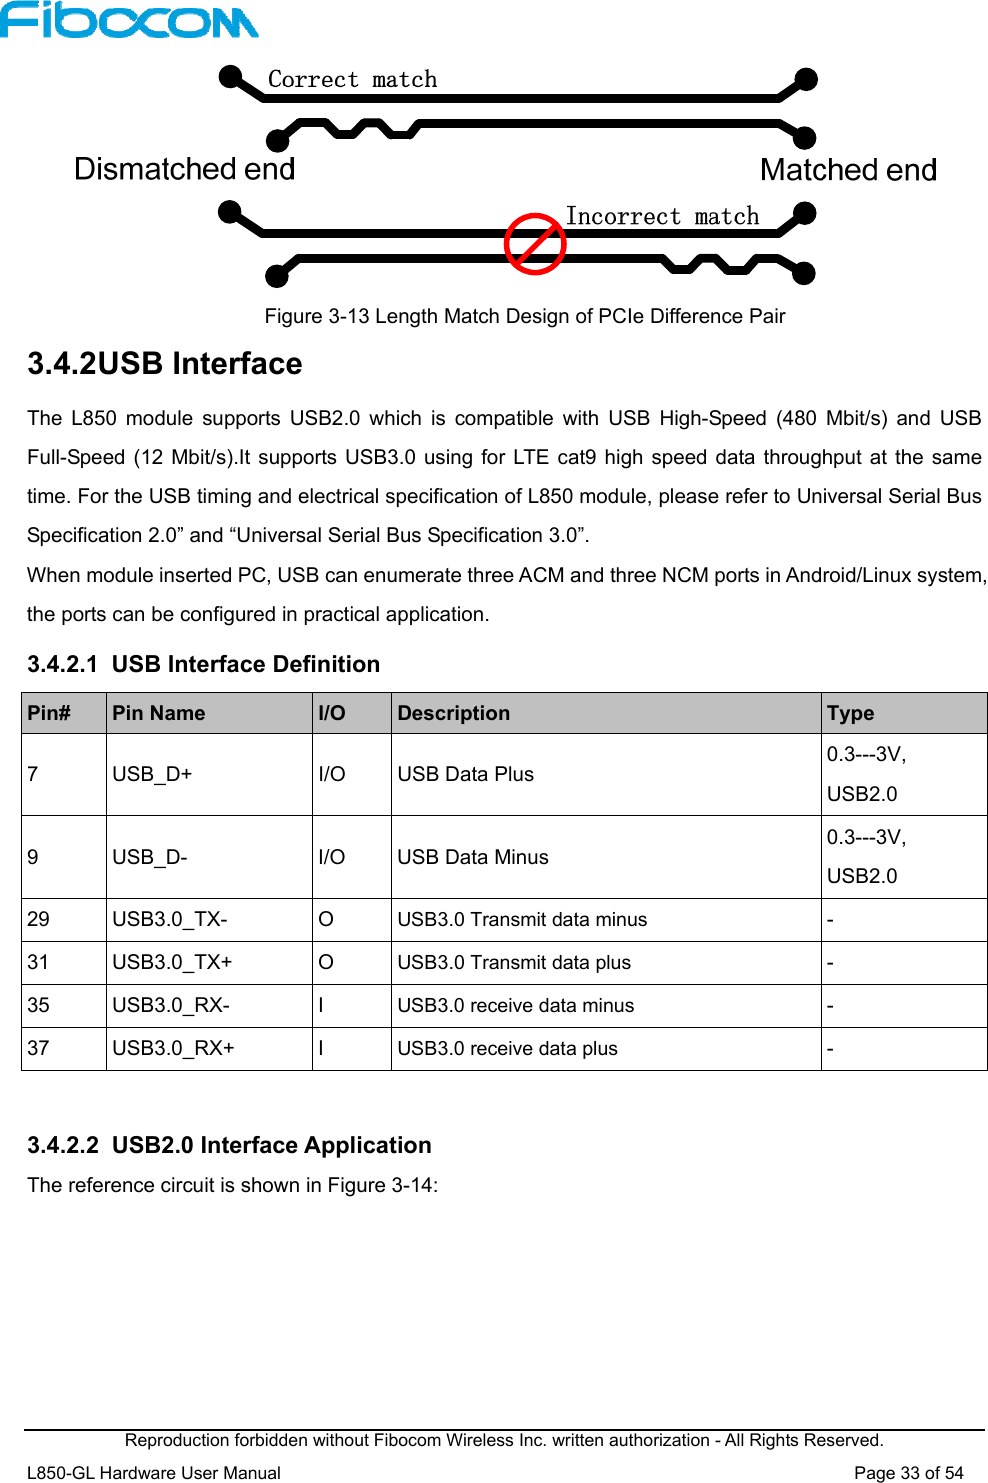  Reproduction forbidden without Fibocom Wireless Inc. written authorization - All Rights Reserved. L850-GL Hardware User Manual                                                                 Page 33 of 54  Figure 3-13 Length Match Design of PCIe Difference Pair 3.4.2 USB Interface The  L850  module  supports  USB2.0  which is  compatible  with USB  High-Speed  (480 Mbit/s)  and  USB Full-Speed (12 Mbit/s).It supports USB3.0 using for LTE cat9 high speed data throughput at the same time. For the USB timing and electrical specification of L850 module, please refer to Universal Serial Bus Specification 2.0” and “Universal Serial Bus Specification 3.0”. When module inserted PC, USB can enumerate three ACM and three NCM ports in Android/Linux system, the ports can be configured in practical application. 3.4.2.1  USB Interface Definition Pin#  Pin Name  I/O  Description  Type 7  USB_D+  I/O  USB Data Plus  0.3---3V,   USB2.0 9  USB_D-  I/O  USB Data Minus  0.3---3V,   USB2.0 29  USB3.0_TX-  O  USB3.0 Transmit data minus - 31  USB3.0_TX+  O  USB3.0 Transmit data plus - 35  USB3.0_RX-  I  USB3.0 receive data minus - 37  USB3.0_RX+  I  USB3.0 receive data plus -  3.4.2.2  USB2.0 Interface Application The reference circuit is shown in Figure 3-14:   